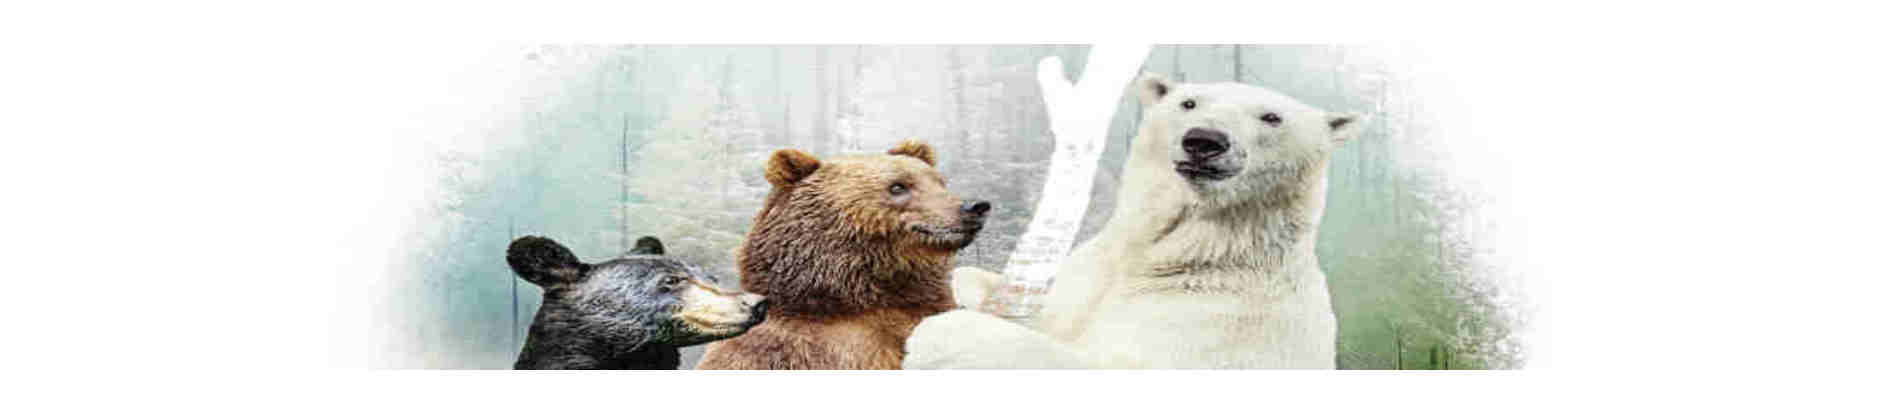 Bruns, blancs, noirs: les ours du Canada / Brown, white, black: bears of Canada